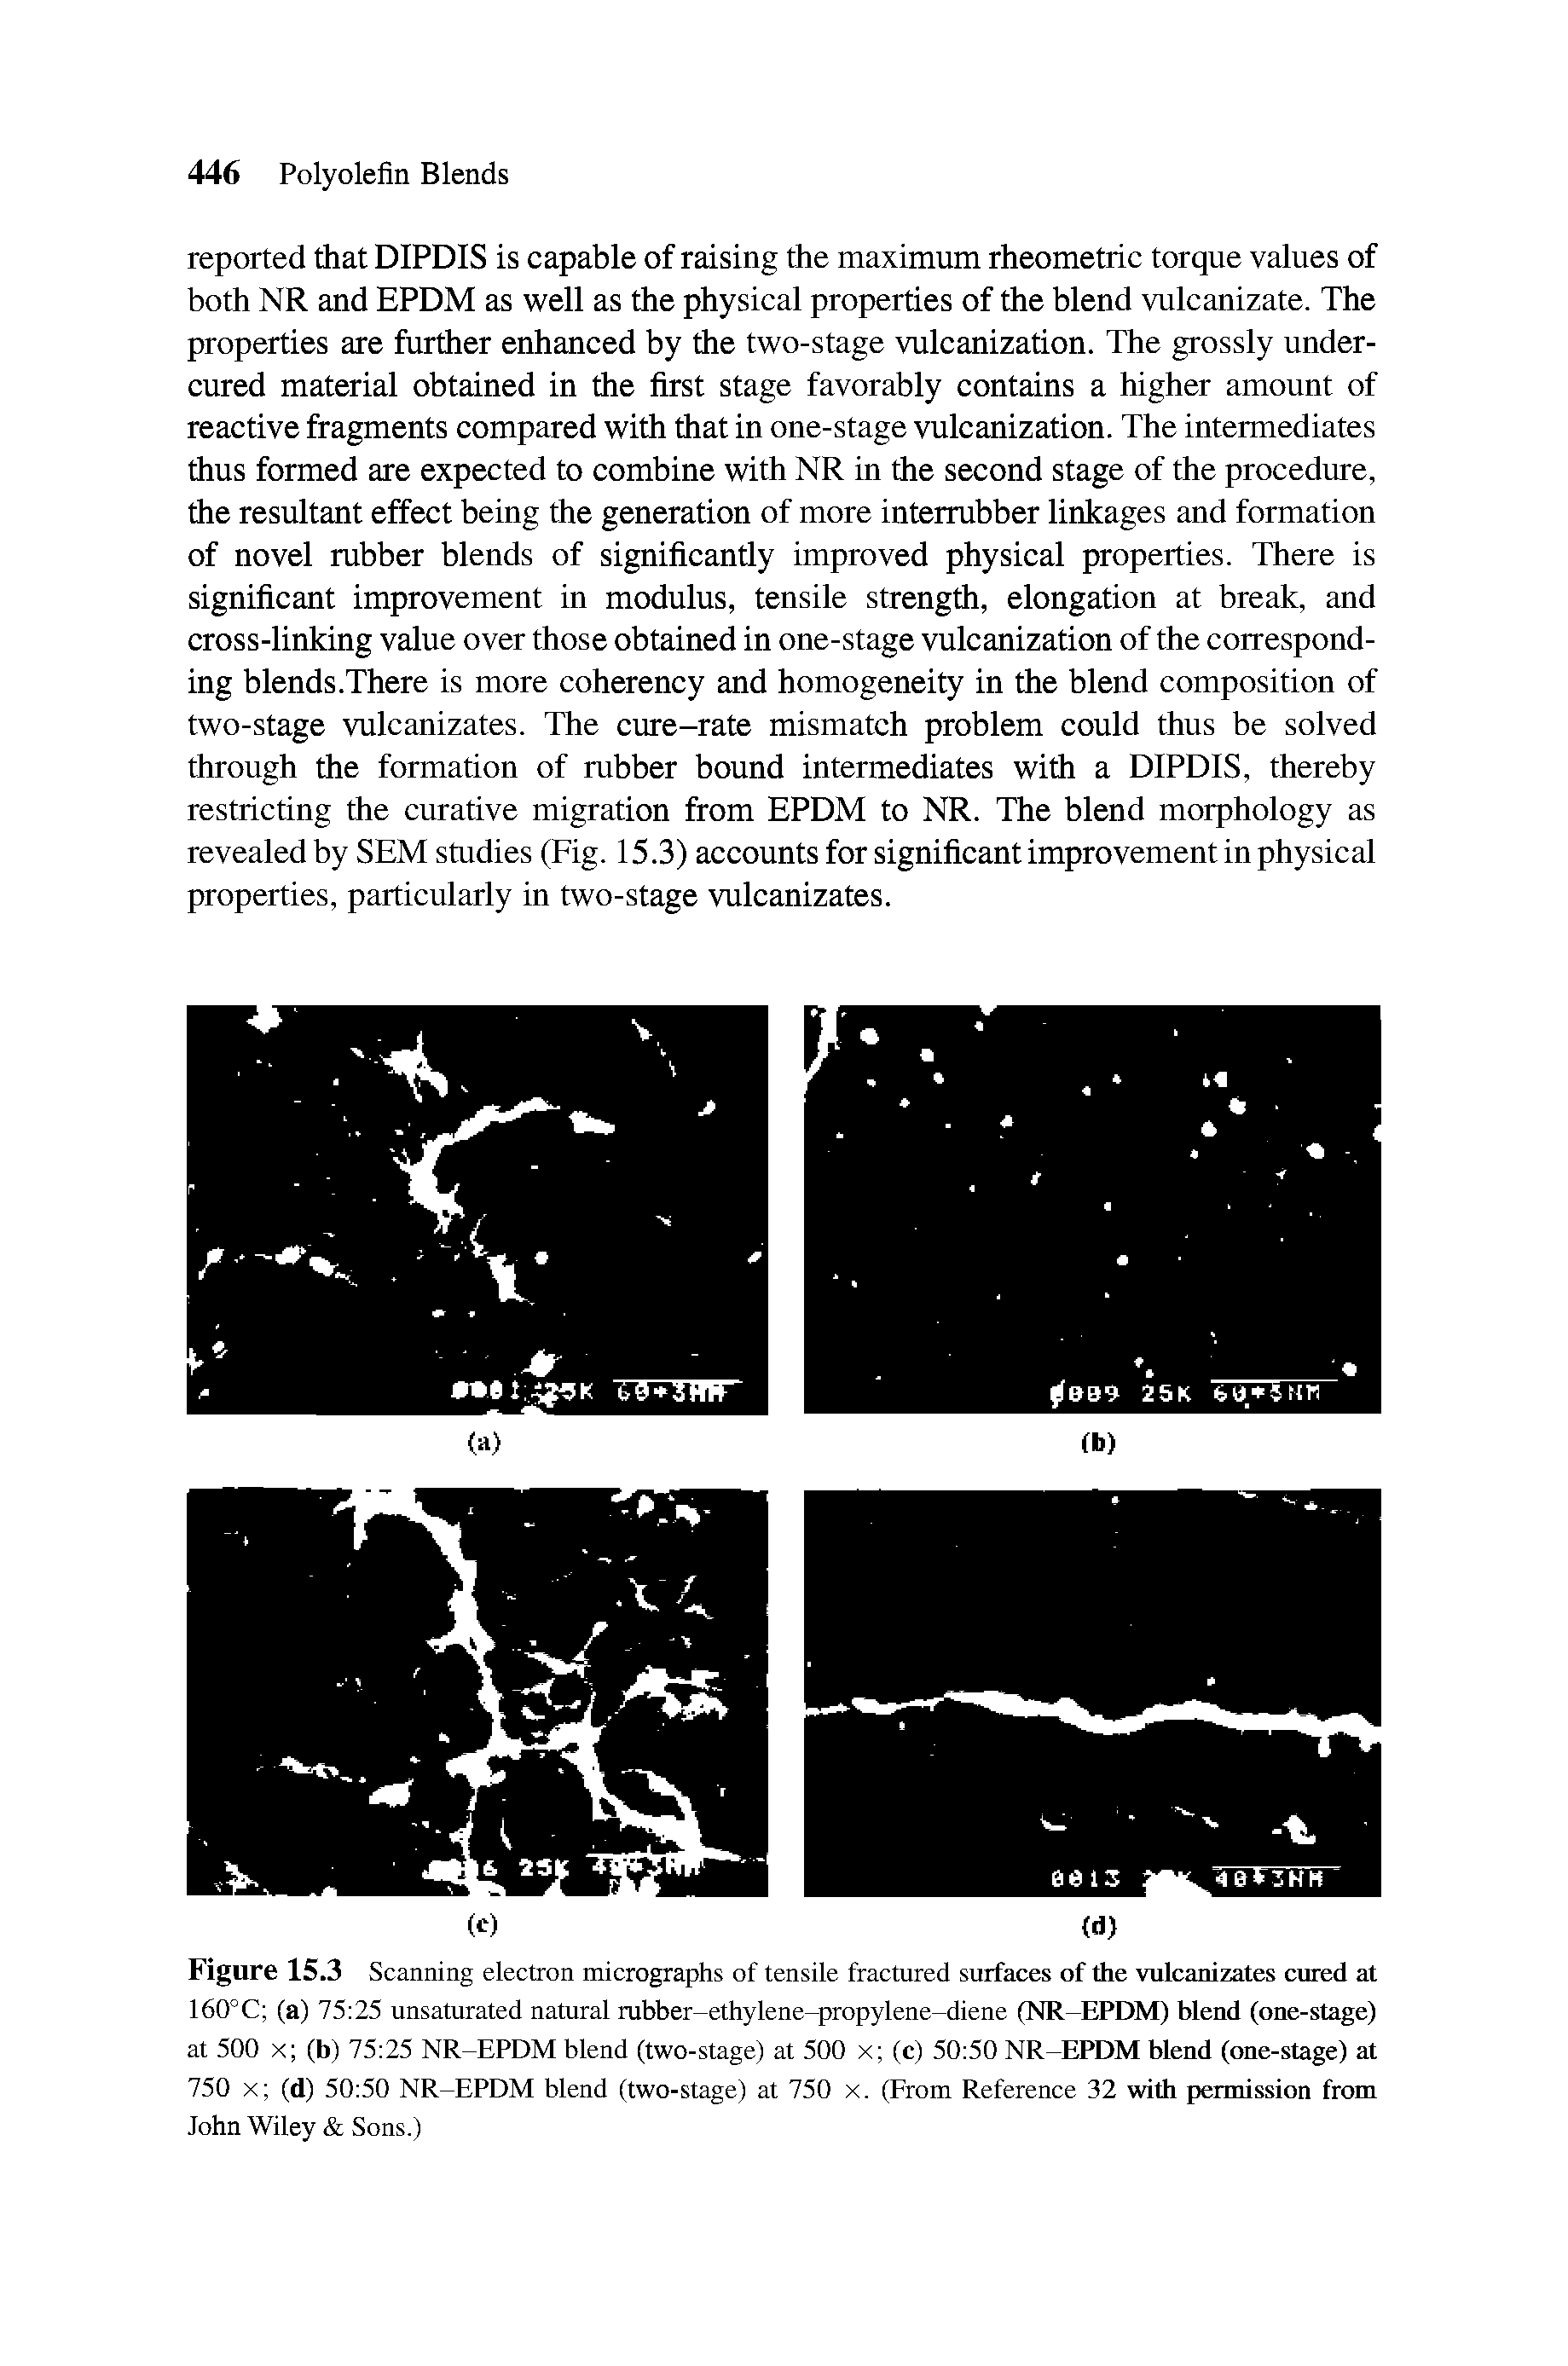 Figure 15.3 Scanning electron micrographs of tensile fractured surfaces of the vulcanizates cured at 160°C (a) 75 25 unsaturated natural rubber-ethylene-propylene-diene (NR-EPDM) blend (one-stage) at 500 x (b) 75 25 NR-EPDM blend (two-stage) at 500 x (c) 50 50 NR-EPDM blend (one-stage) at 750 x (d) 50 50 NR-EPDM blend (two-stage) at 750 x. (From Reference 32 with permission from John Wiley Sons.)...